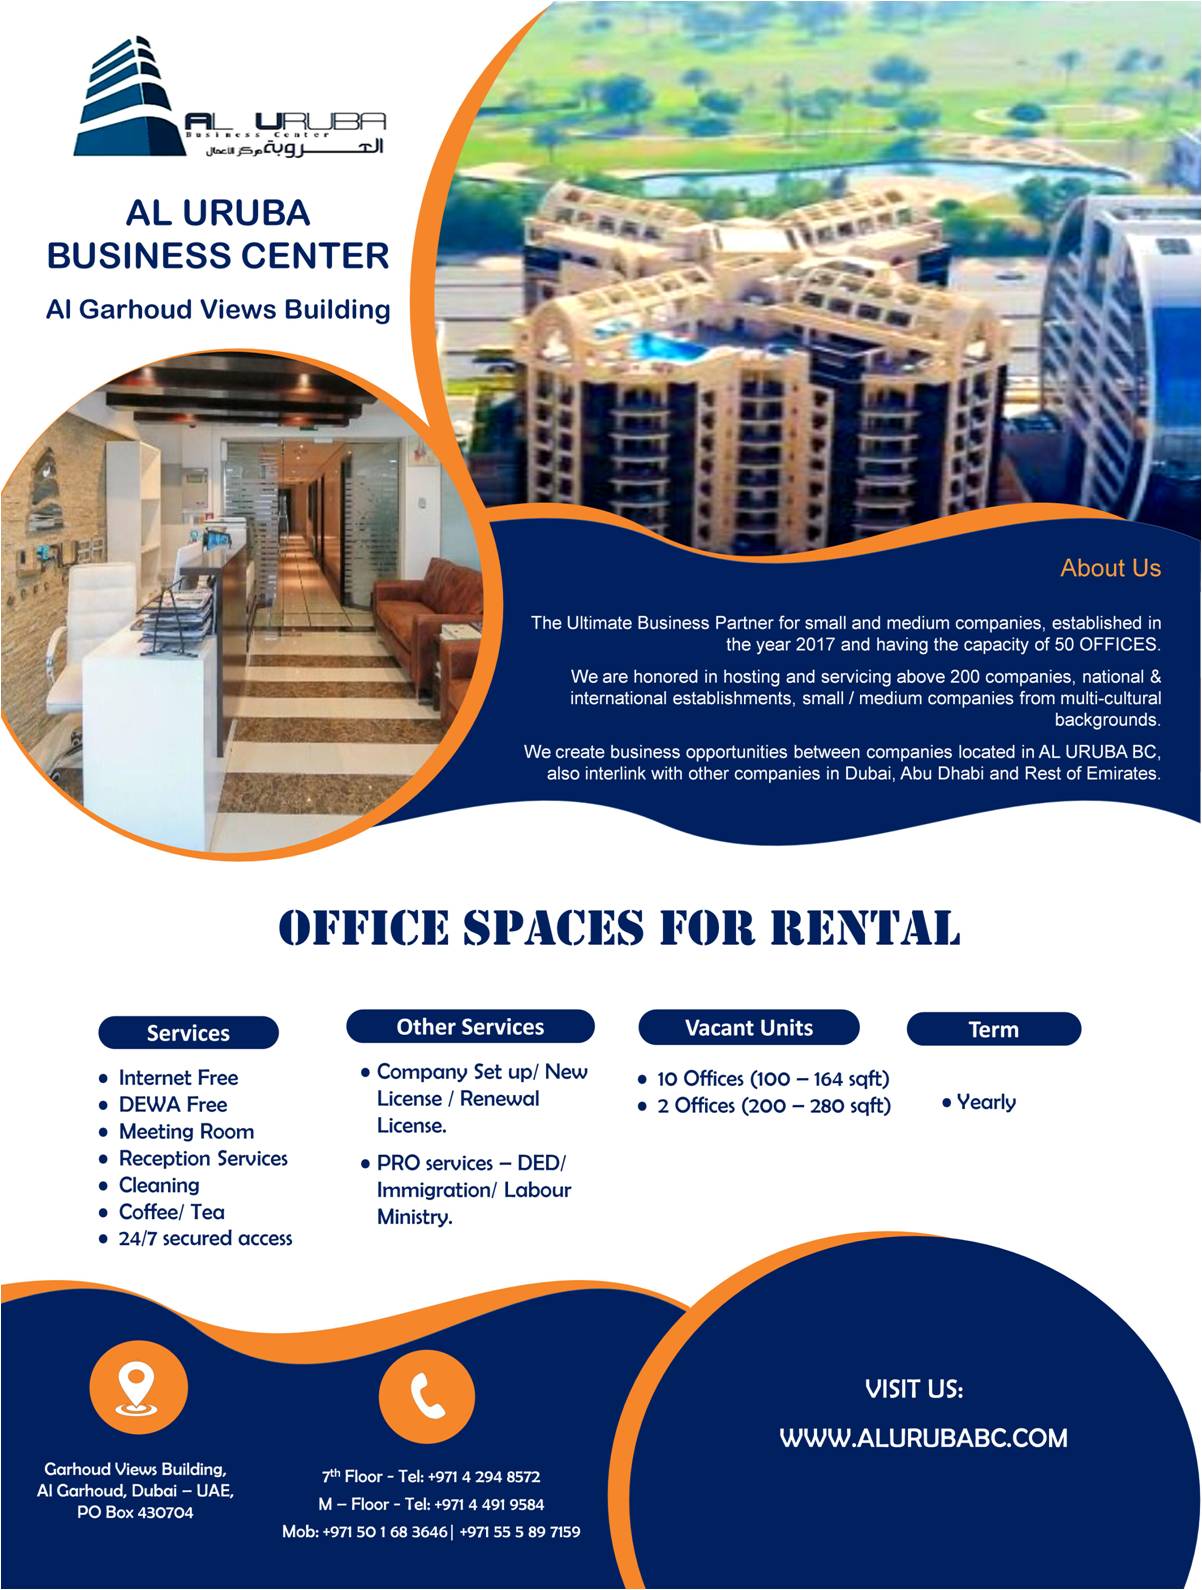 OFFICE SPACE FOR RENTAL